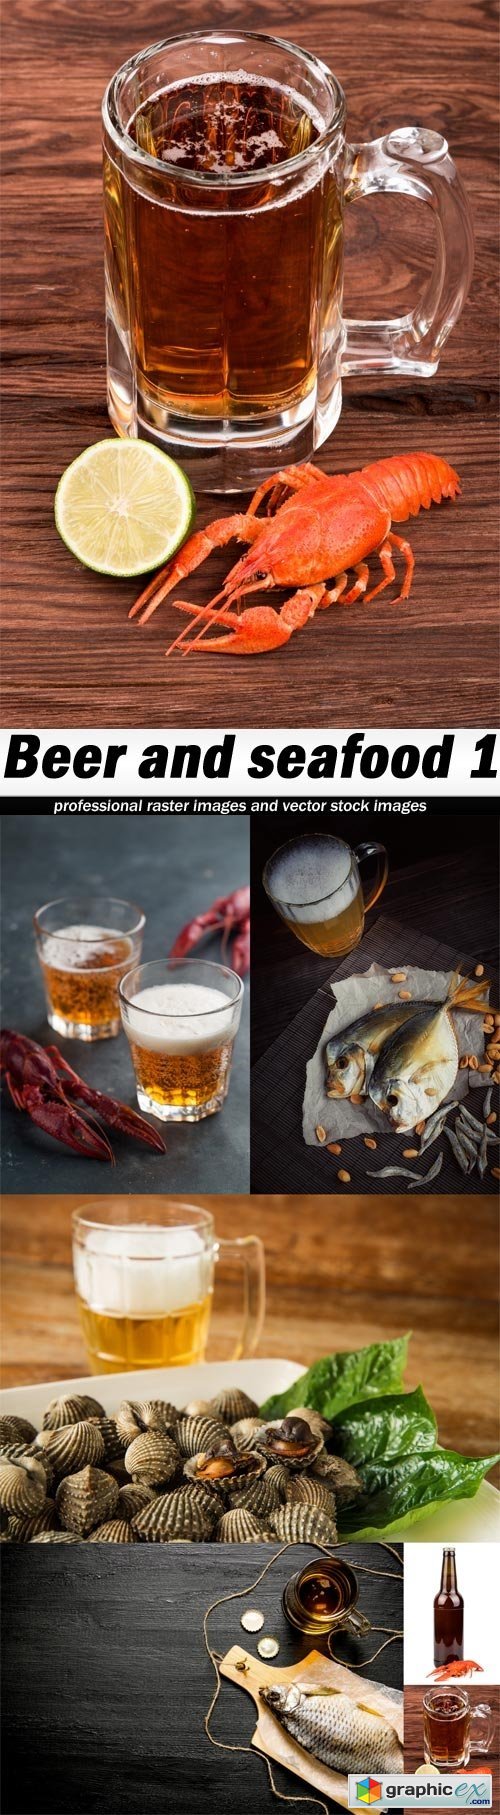 Beer and seafood 1-6xJPEGs